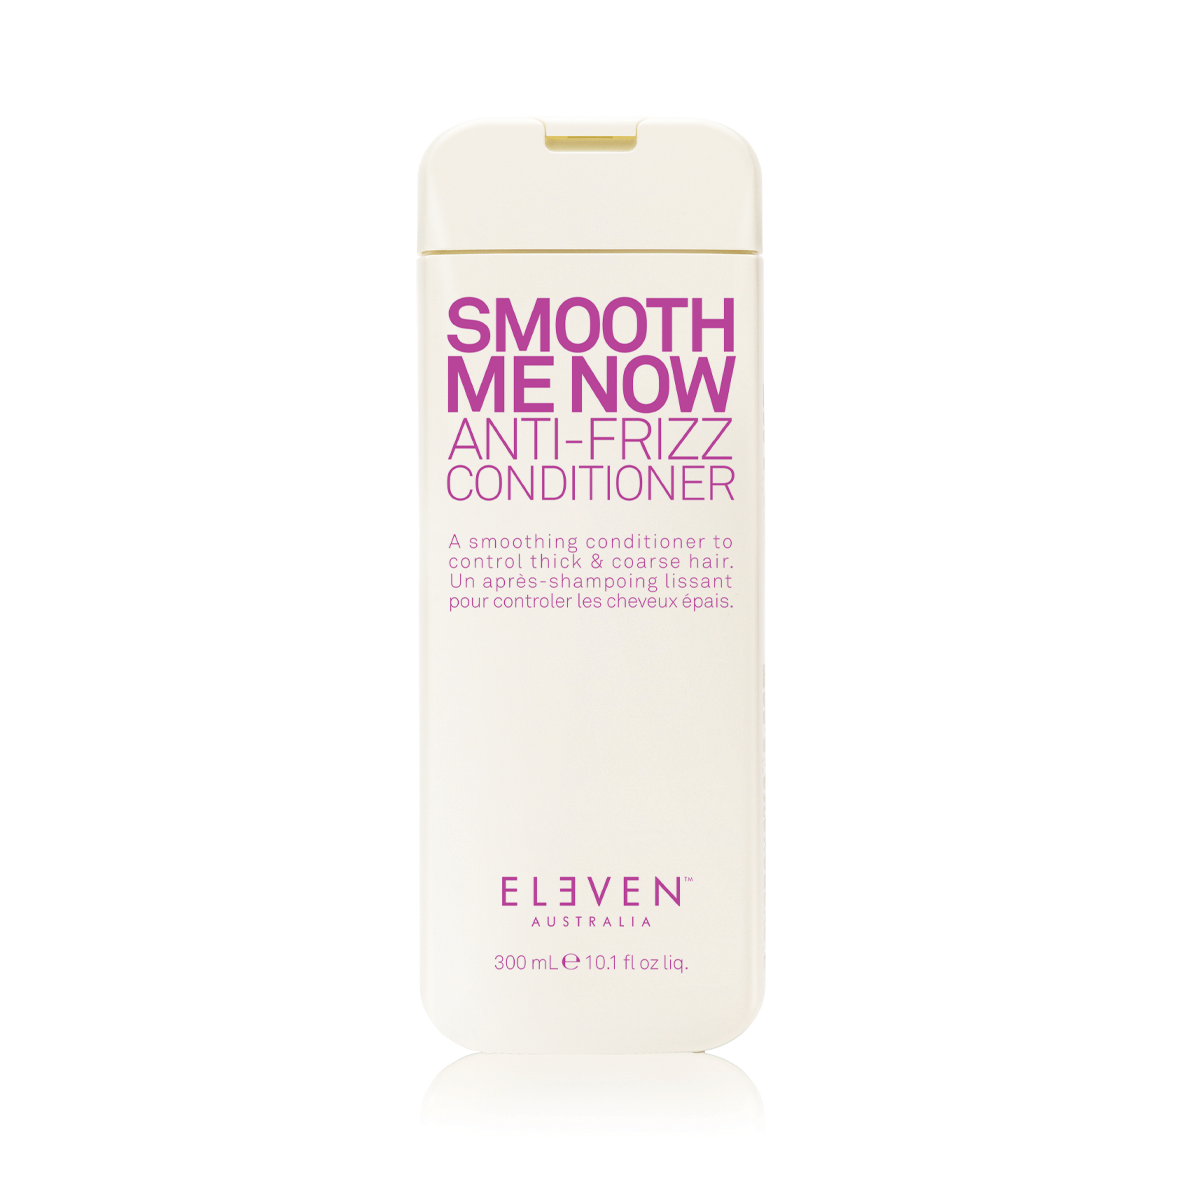 Smooth Me Now Anti Frizz Conditioner